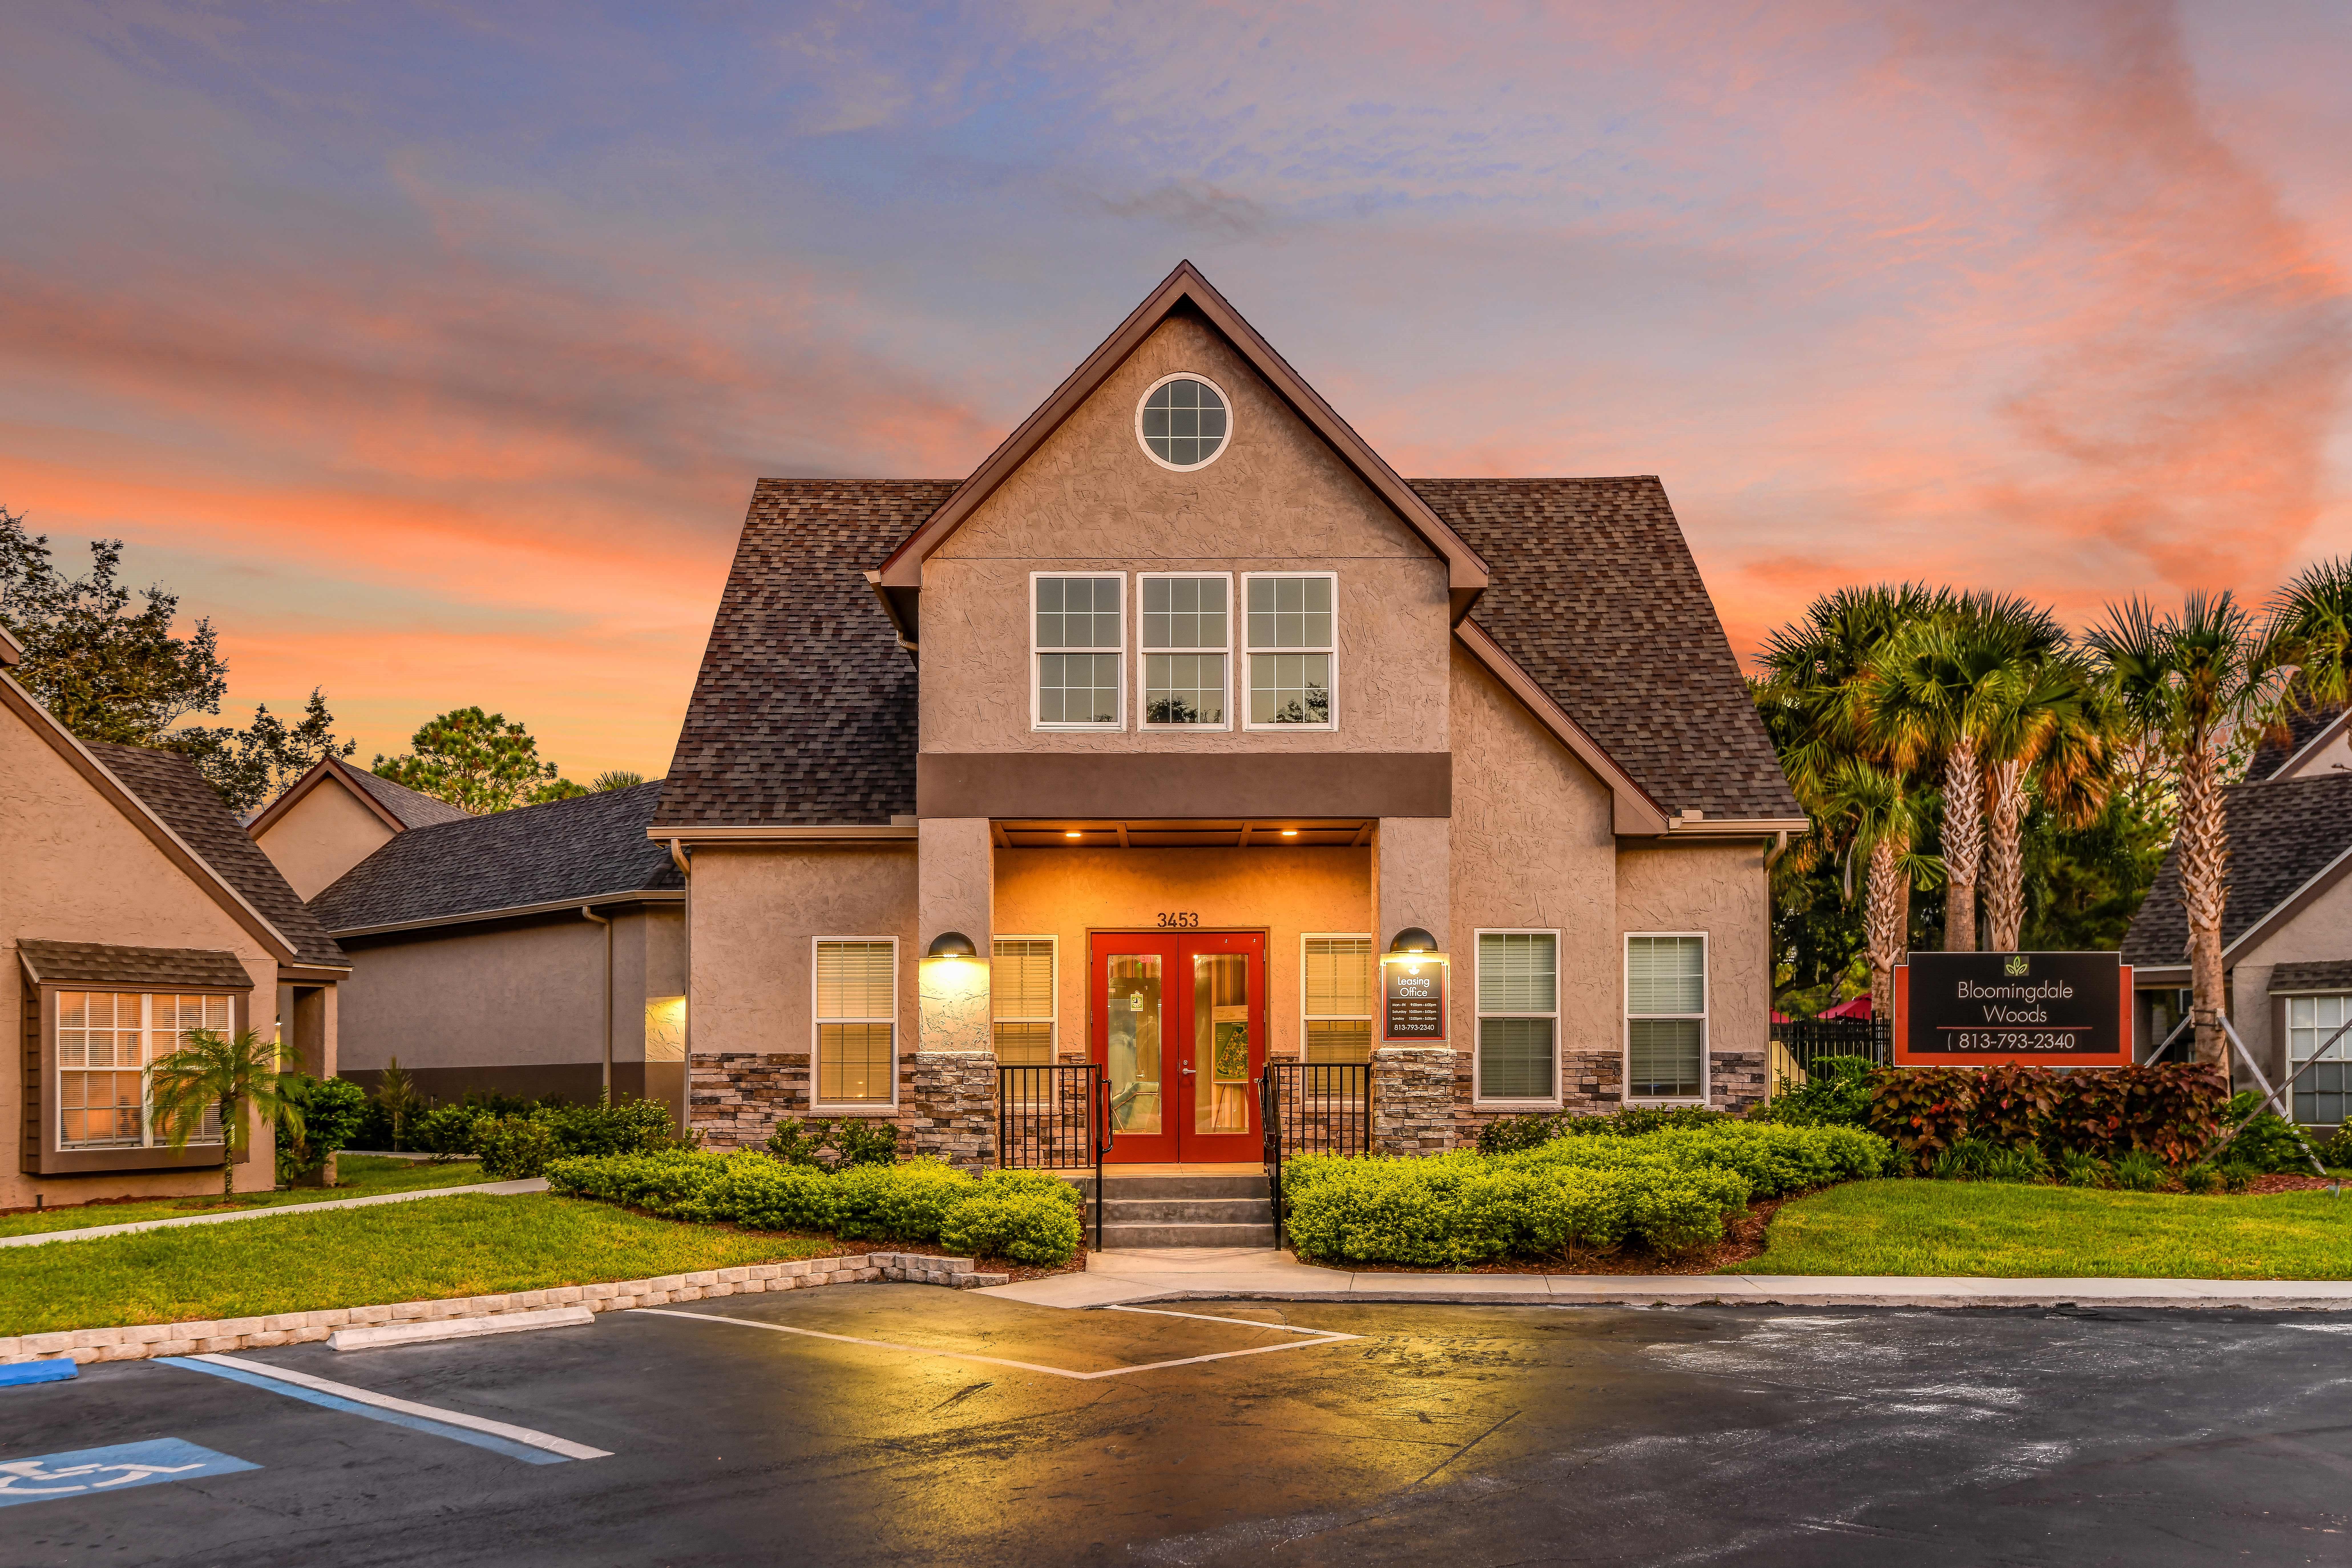 Bloomingdale Woods Apartments Valrico Florida Clubhouse Exterior with Gorgeous Sunset in background Sunset